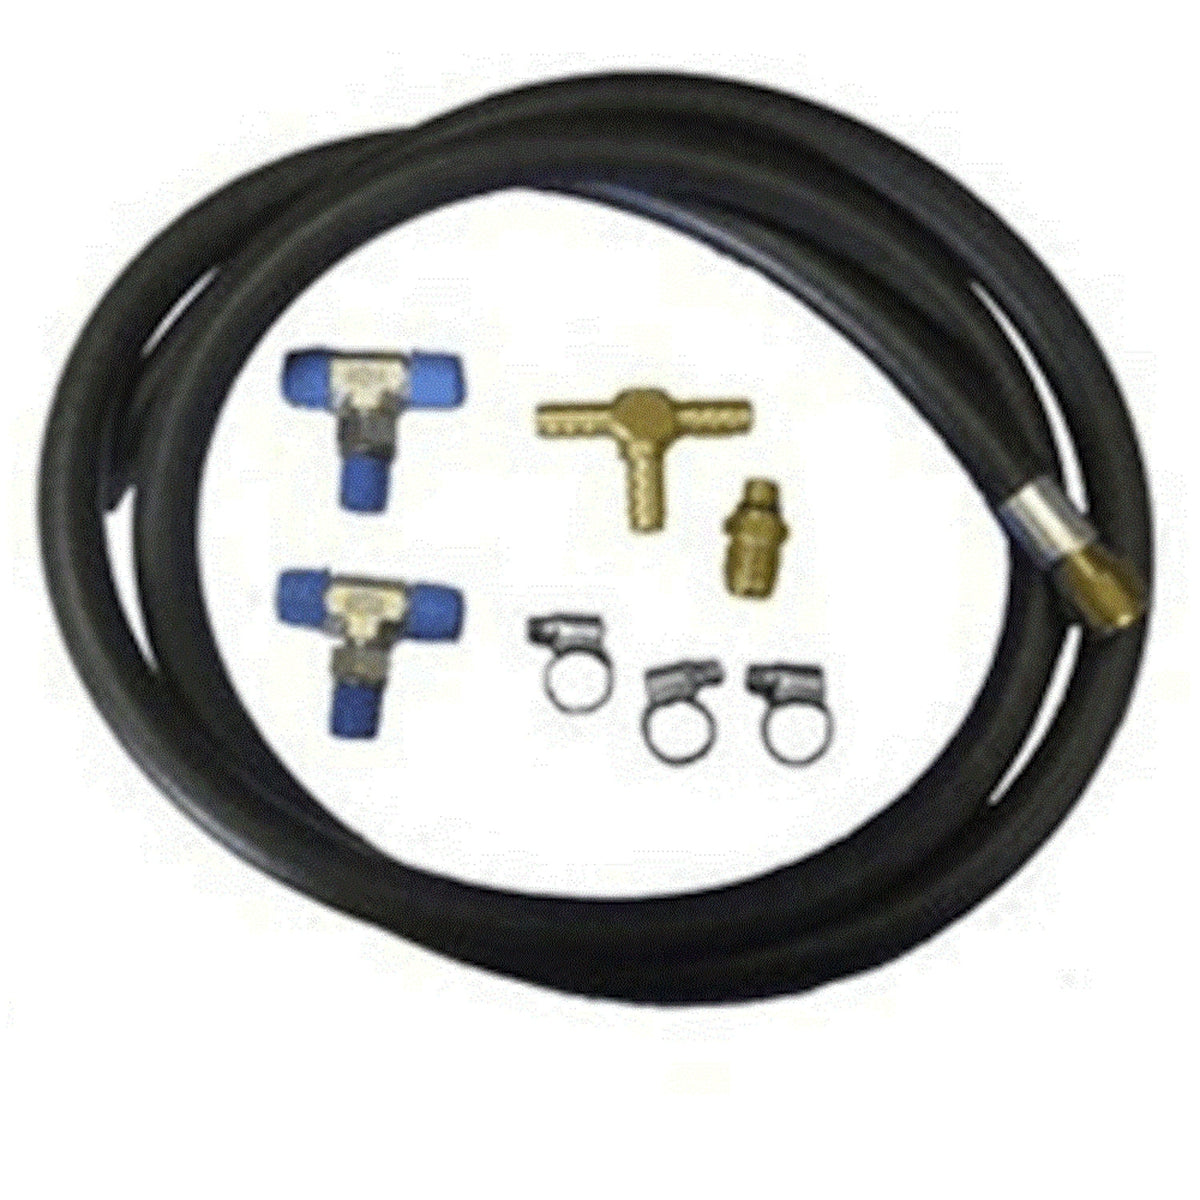 Lowrance Qualifies for Free Shipping Lowrance Verado Fitting Kit for Pump-1 #000-11772-001